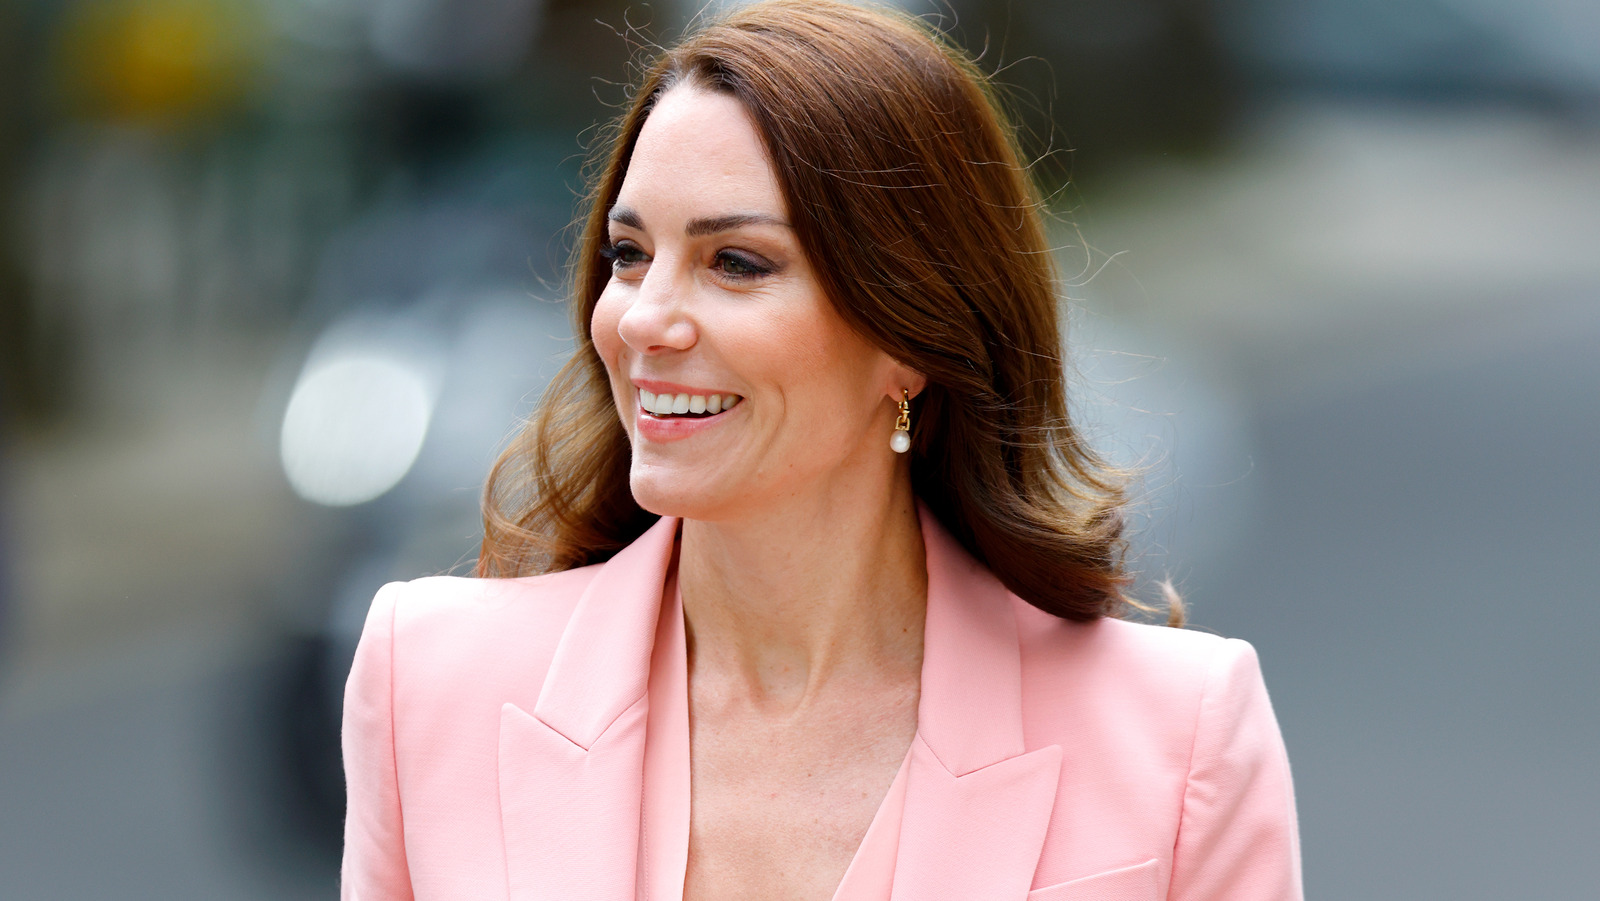 Kate Middleton's Wedding Guest Dress Is Her Most Whimsical Pink Look Yet